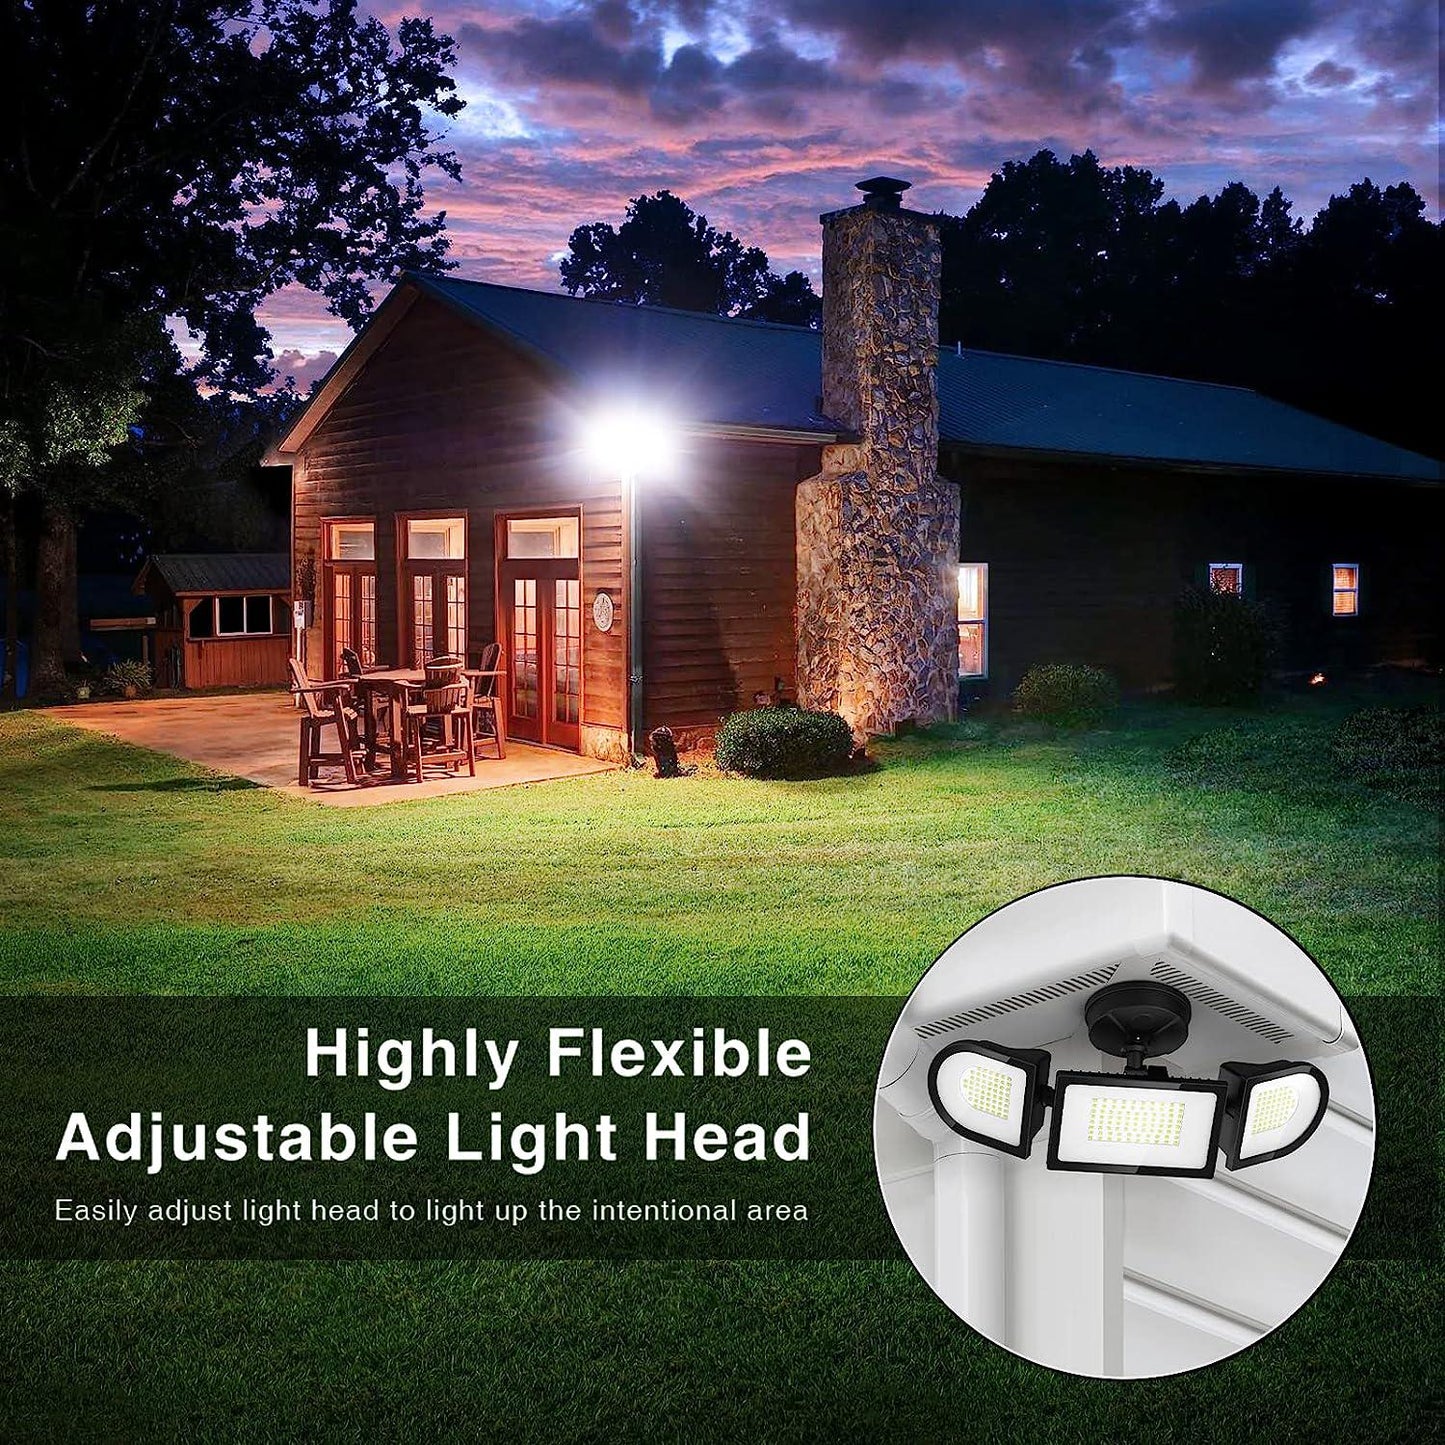 100W Flood Lights Outdoor, 9000LM Super Bright LED Flood Light Outdoor, IP65 Waterproof LED Exterior Floodlight with 3 Adjustable Heads, 6500K White Outdoor Security Light